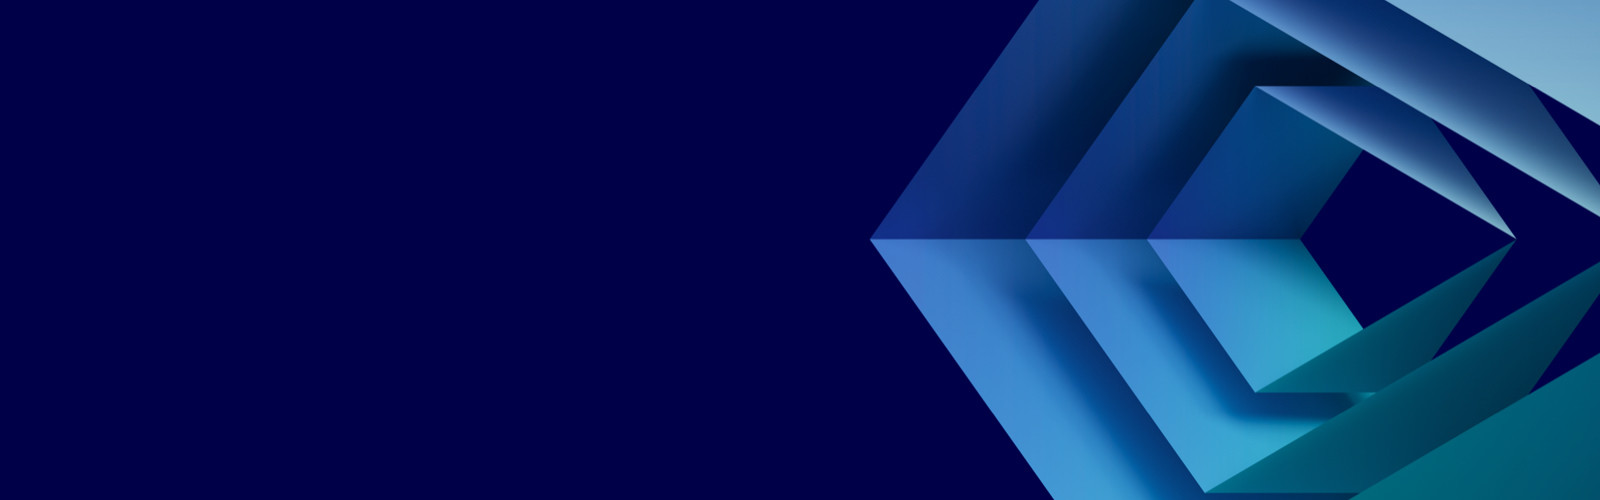 Cognizant logo on a midnight blue background